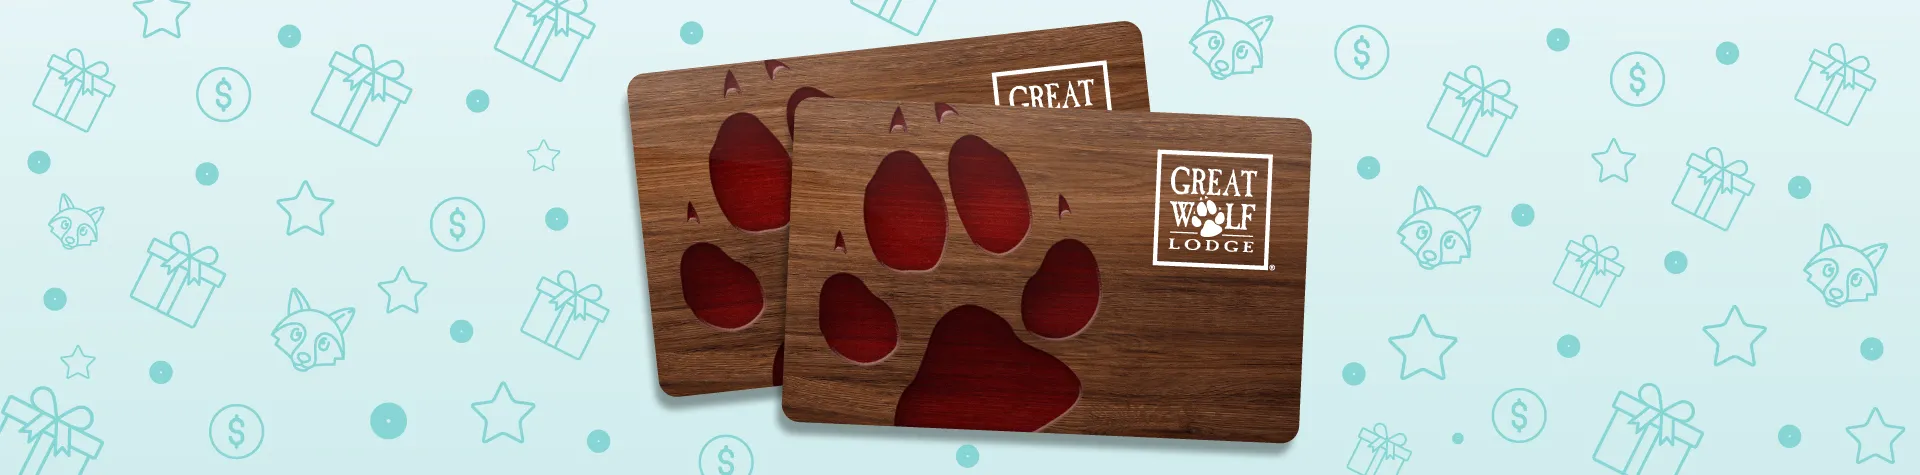 Great Wolf Lodge gift cards